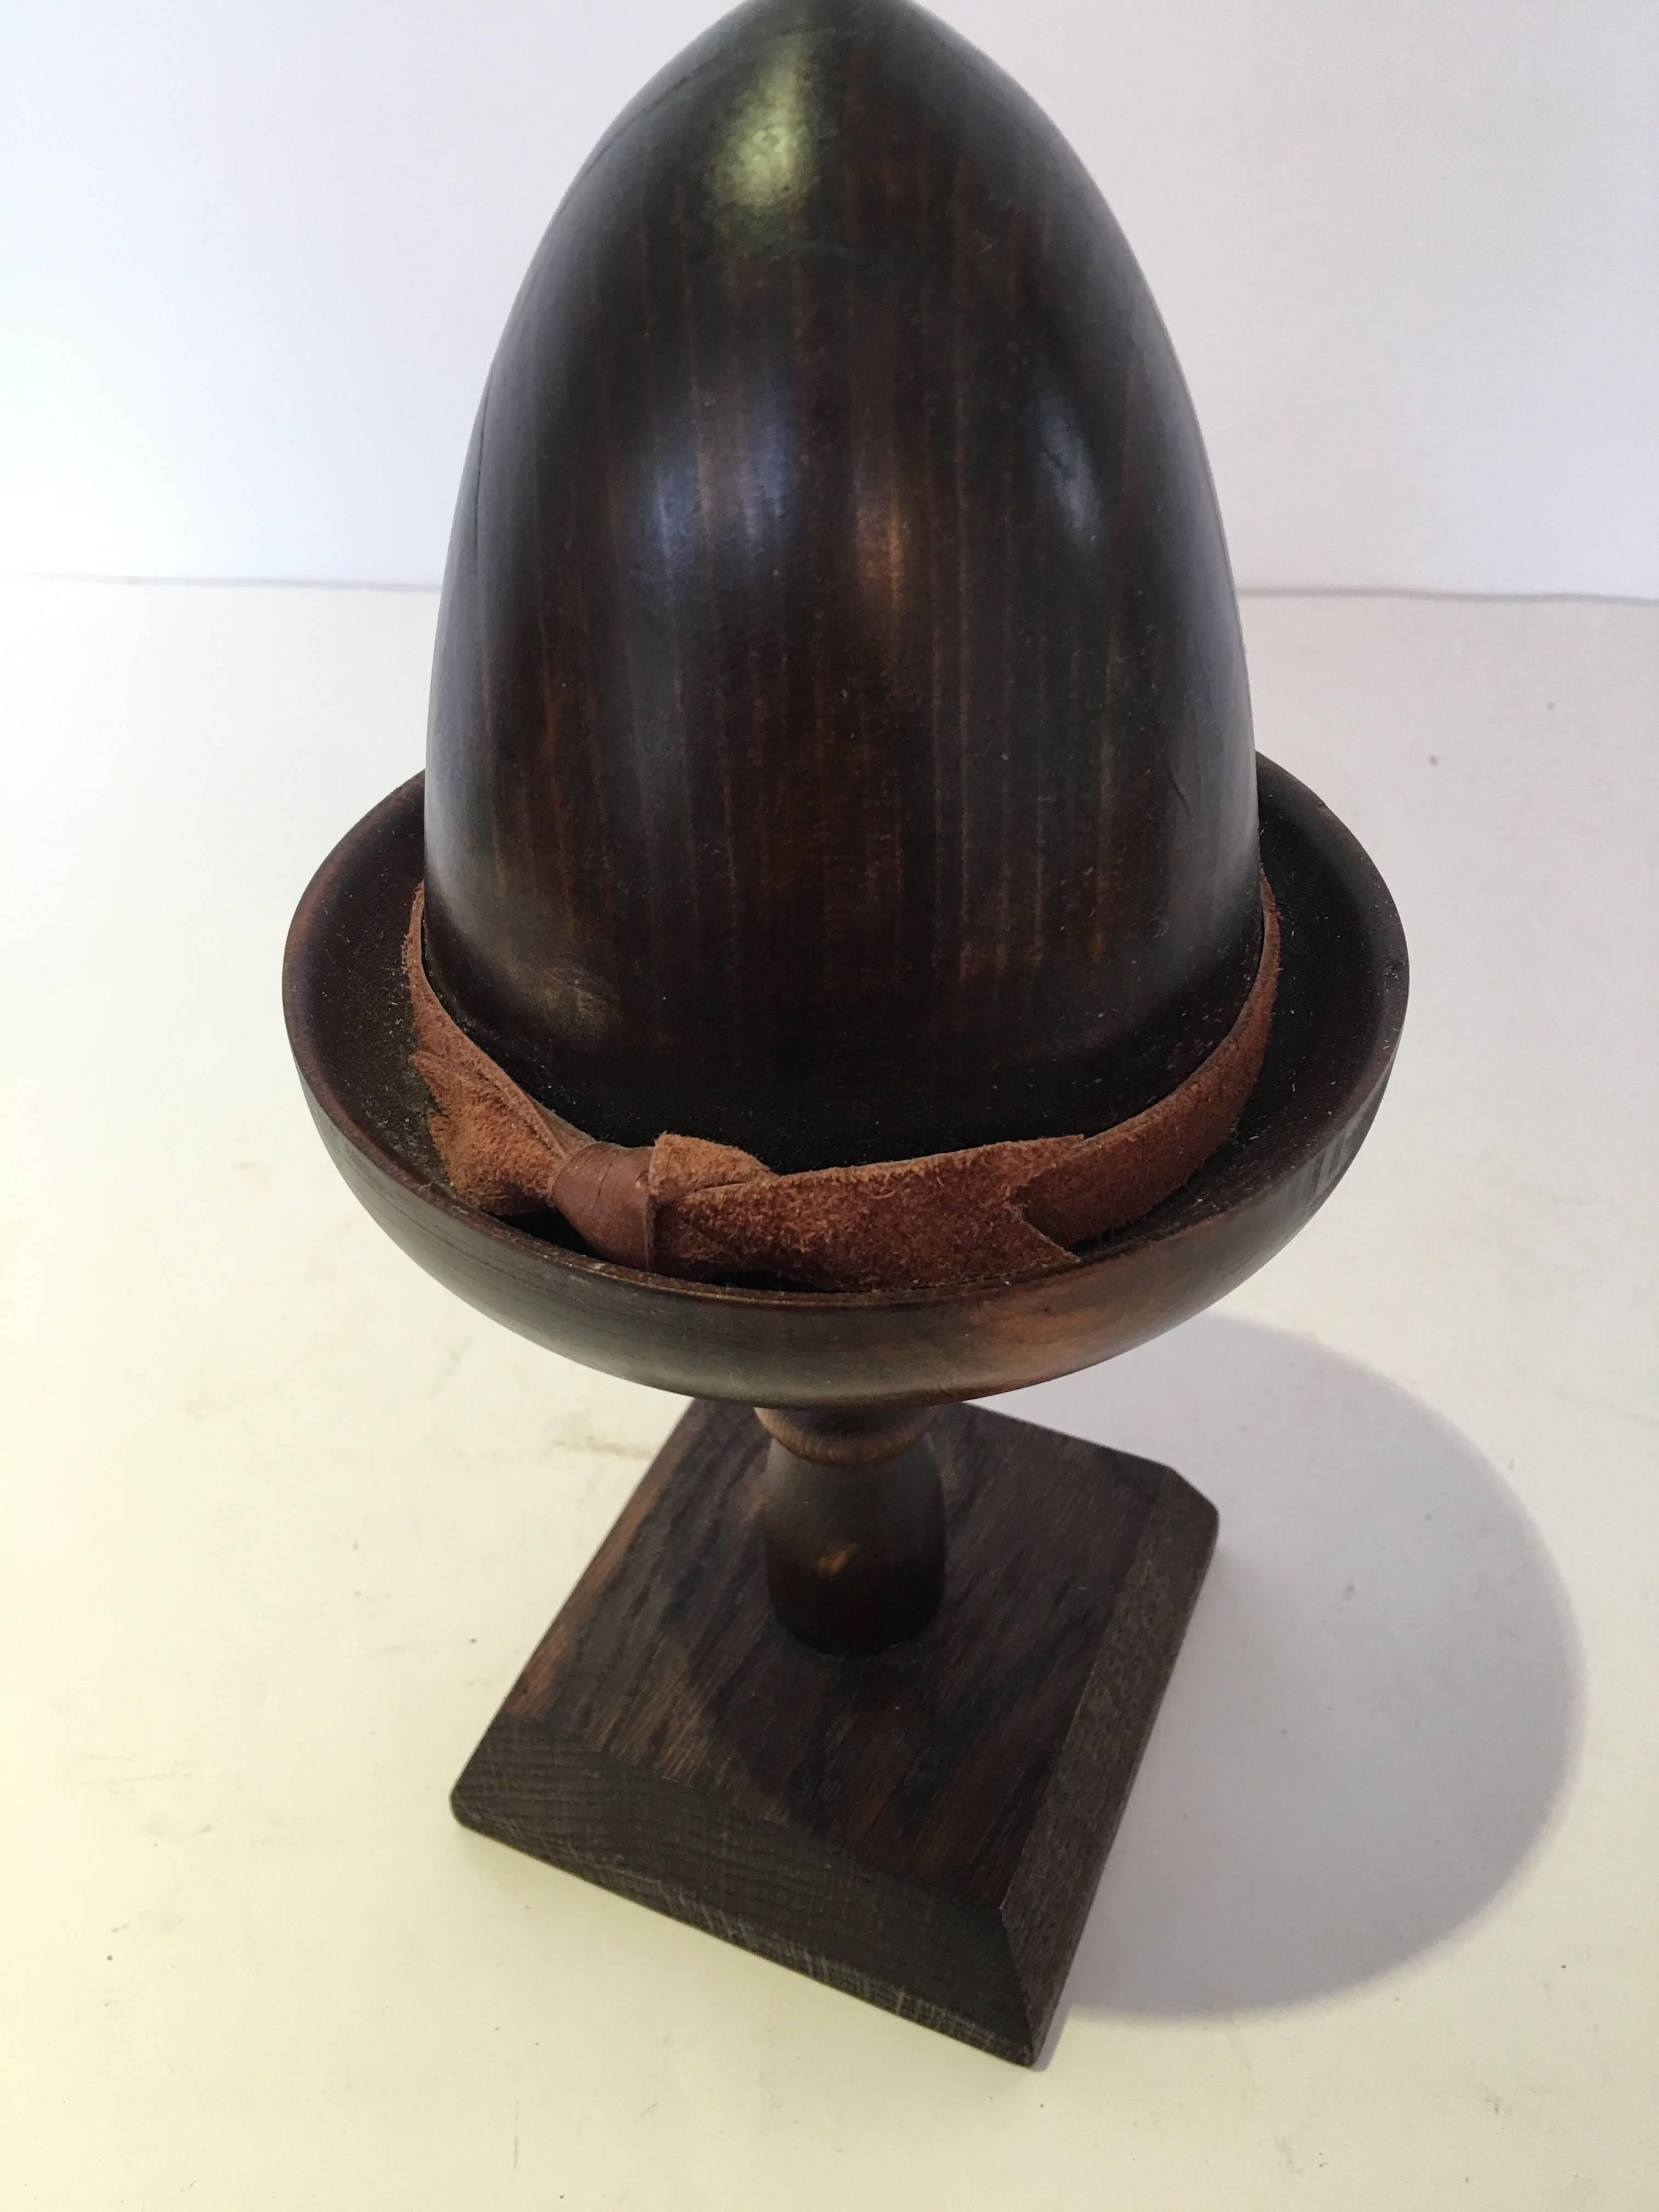 Exquisite English wood doll hat form mold on wood stand,
circa 1920s-1940s #6/ #3428
Brown suede brim detail.